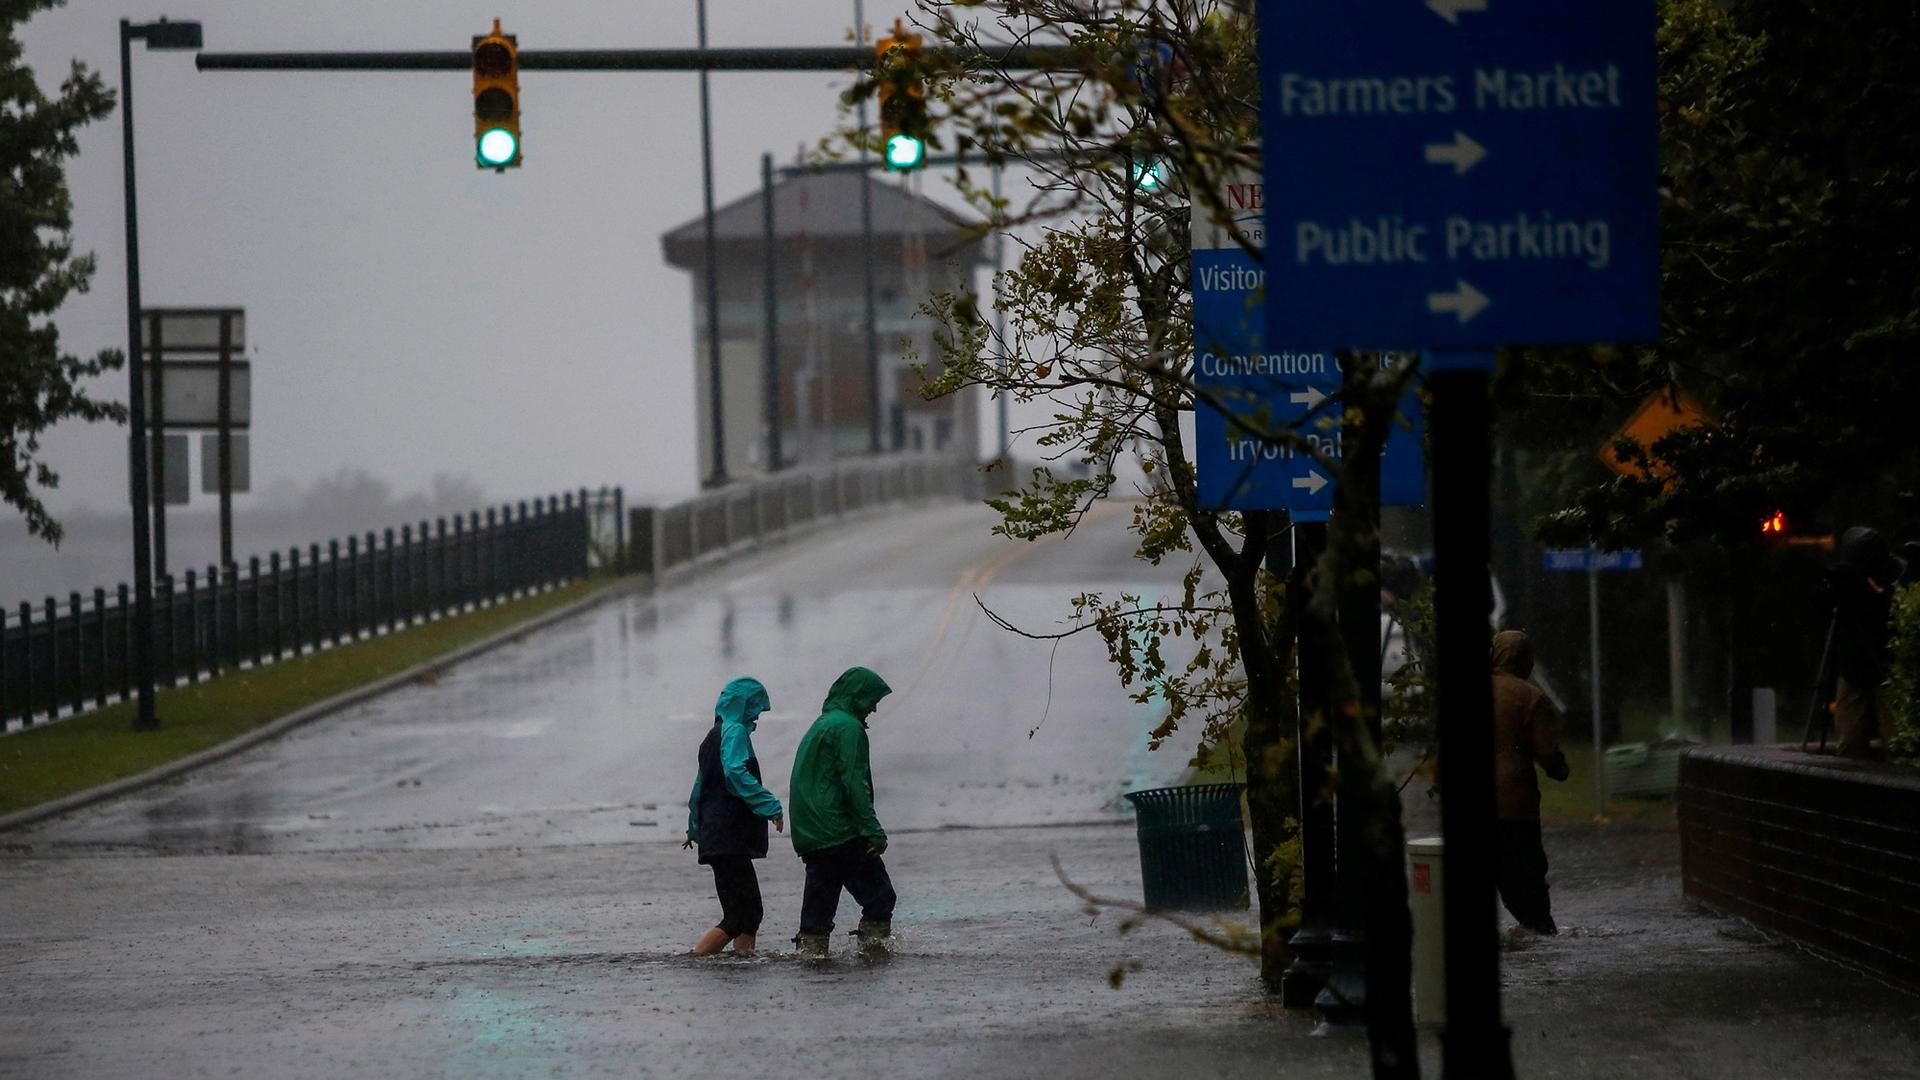 People are shown in rain jackets wading through a flooded street in New Bern, North Carolina, Sept. 13, 2018.